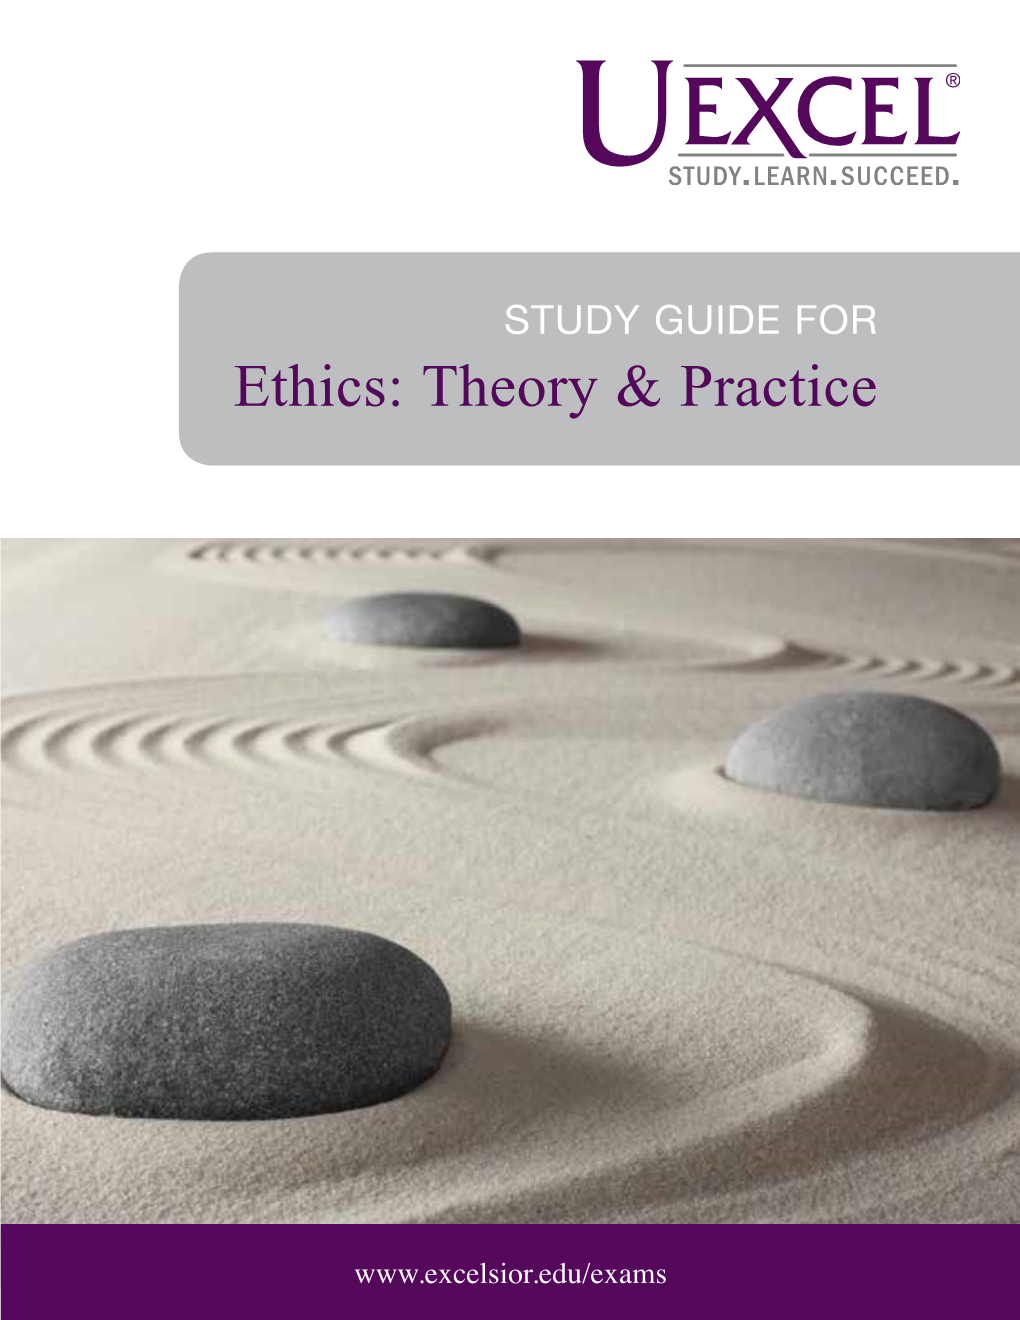 Uexcel Study Guide for Ethics: Theory & Practice